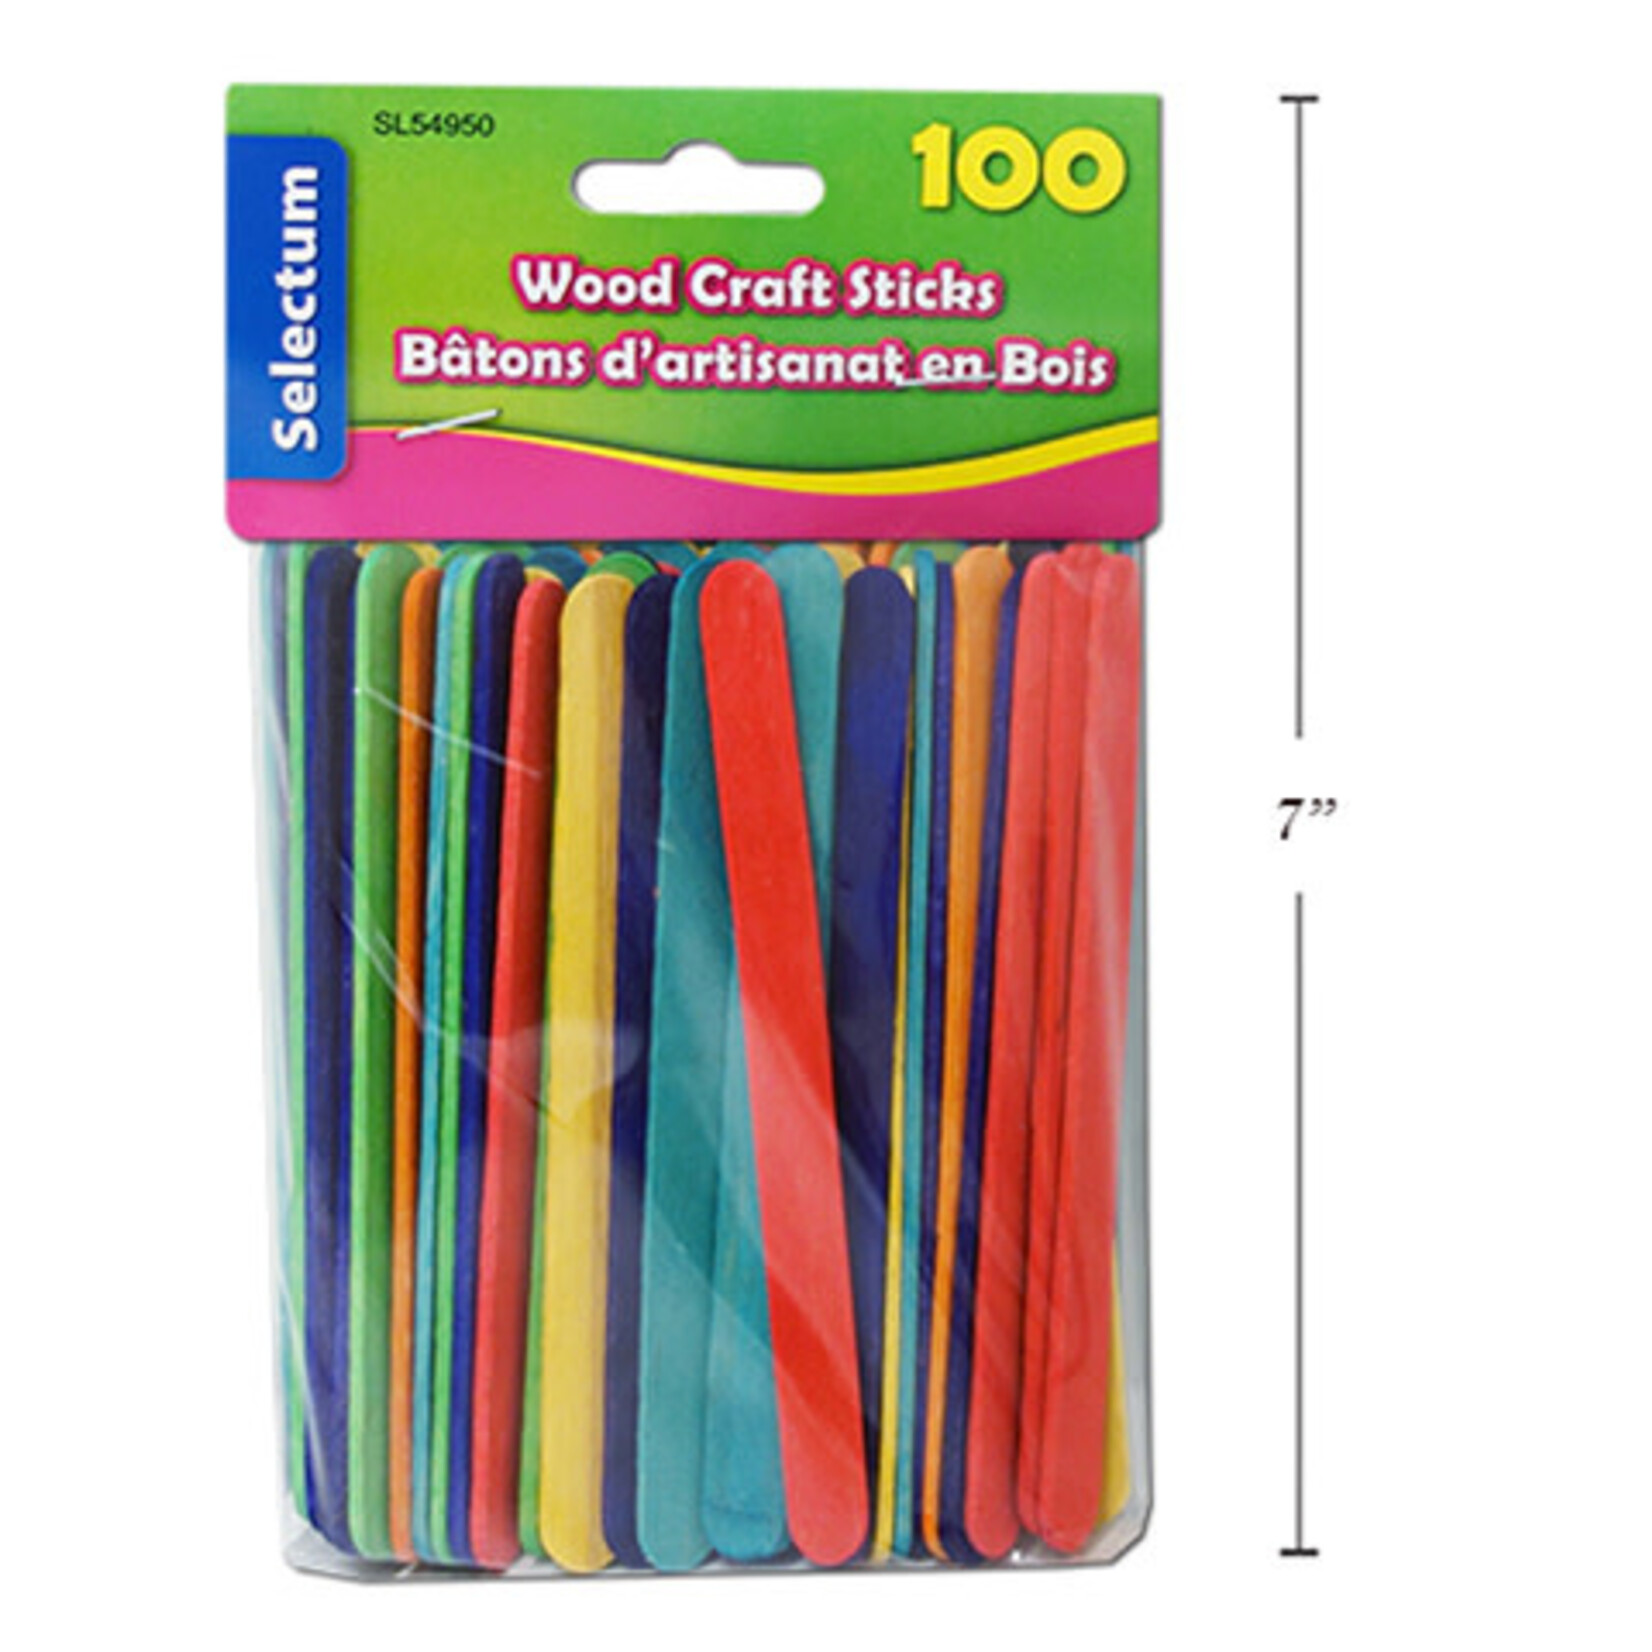 Wooden Craft Sticks 100 Pieces (114mm) 4.5 Inches Coloured